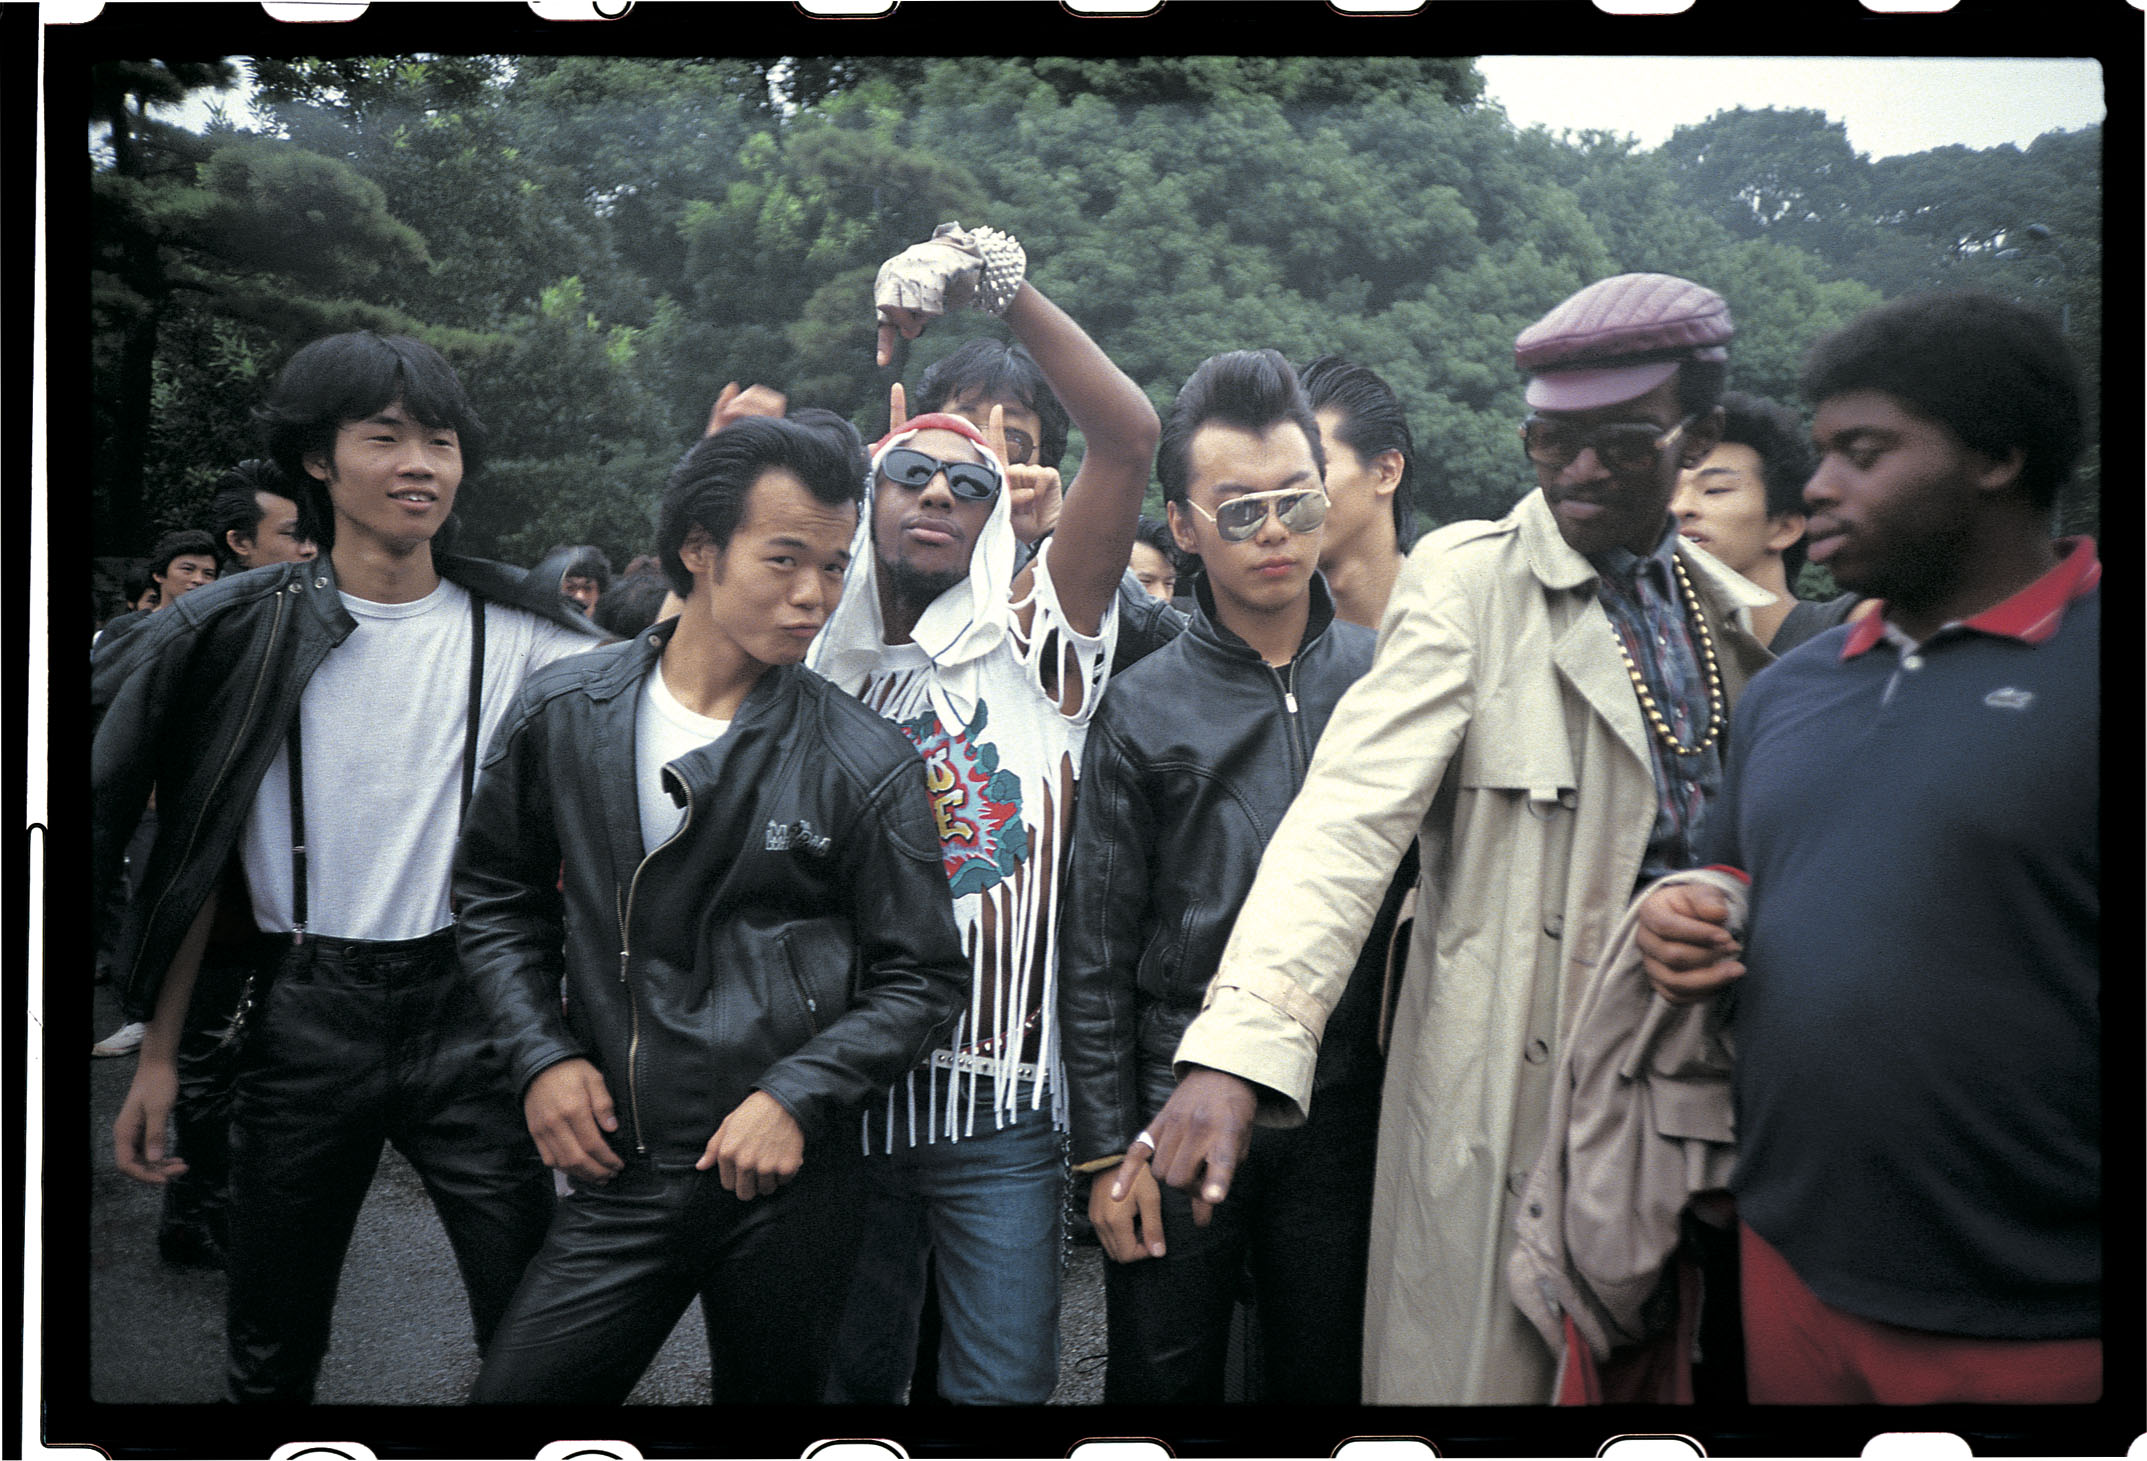 Rockers and rappers: Busy Bee and Fab 5 Freddy from 'Wild Style' mingle with rockers in Tokyo's Yoyogi Park after overcoming initial concerns the leather-clad group were gang members. | CHARLIE AHEARN